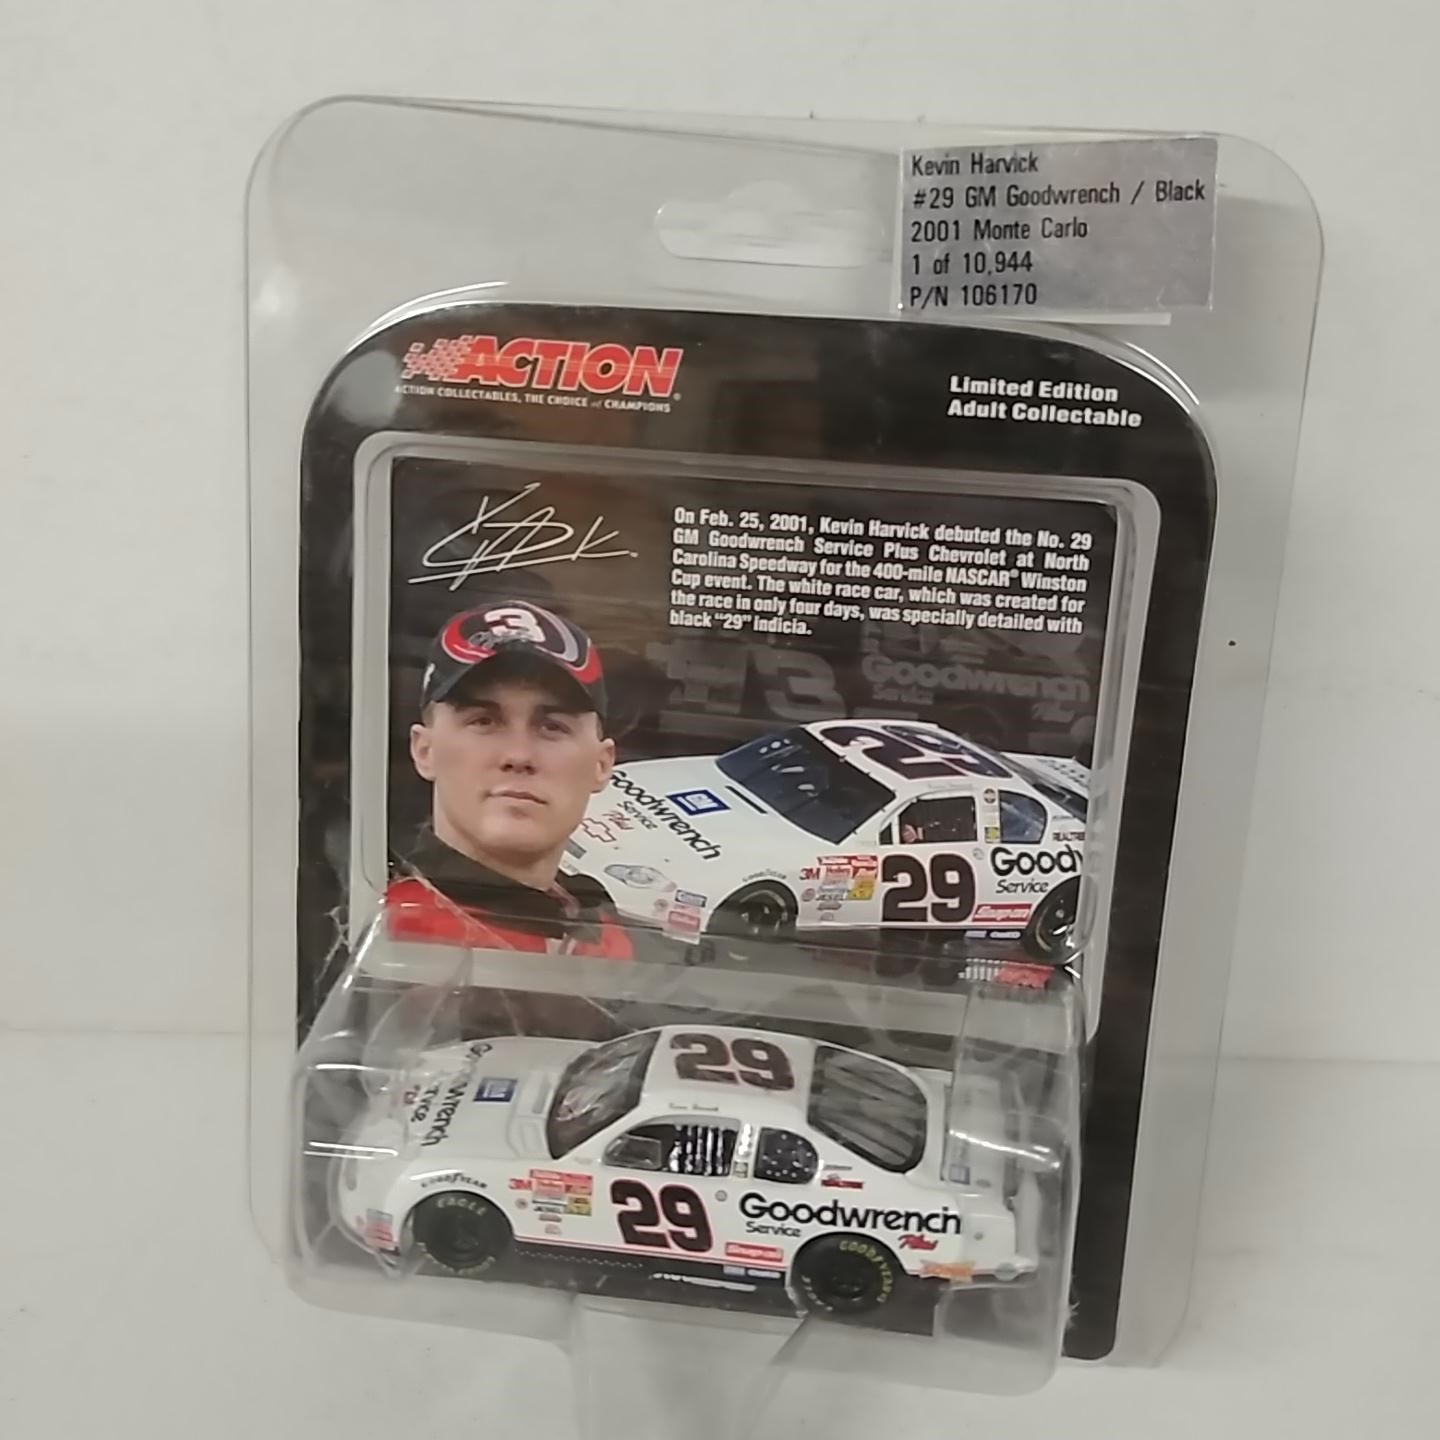 2001 Kevin Harvick 1/64th Goodwrench car white with black trim